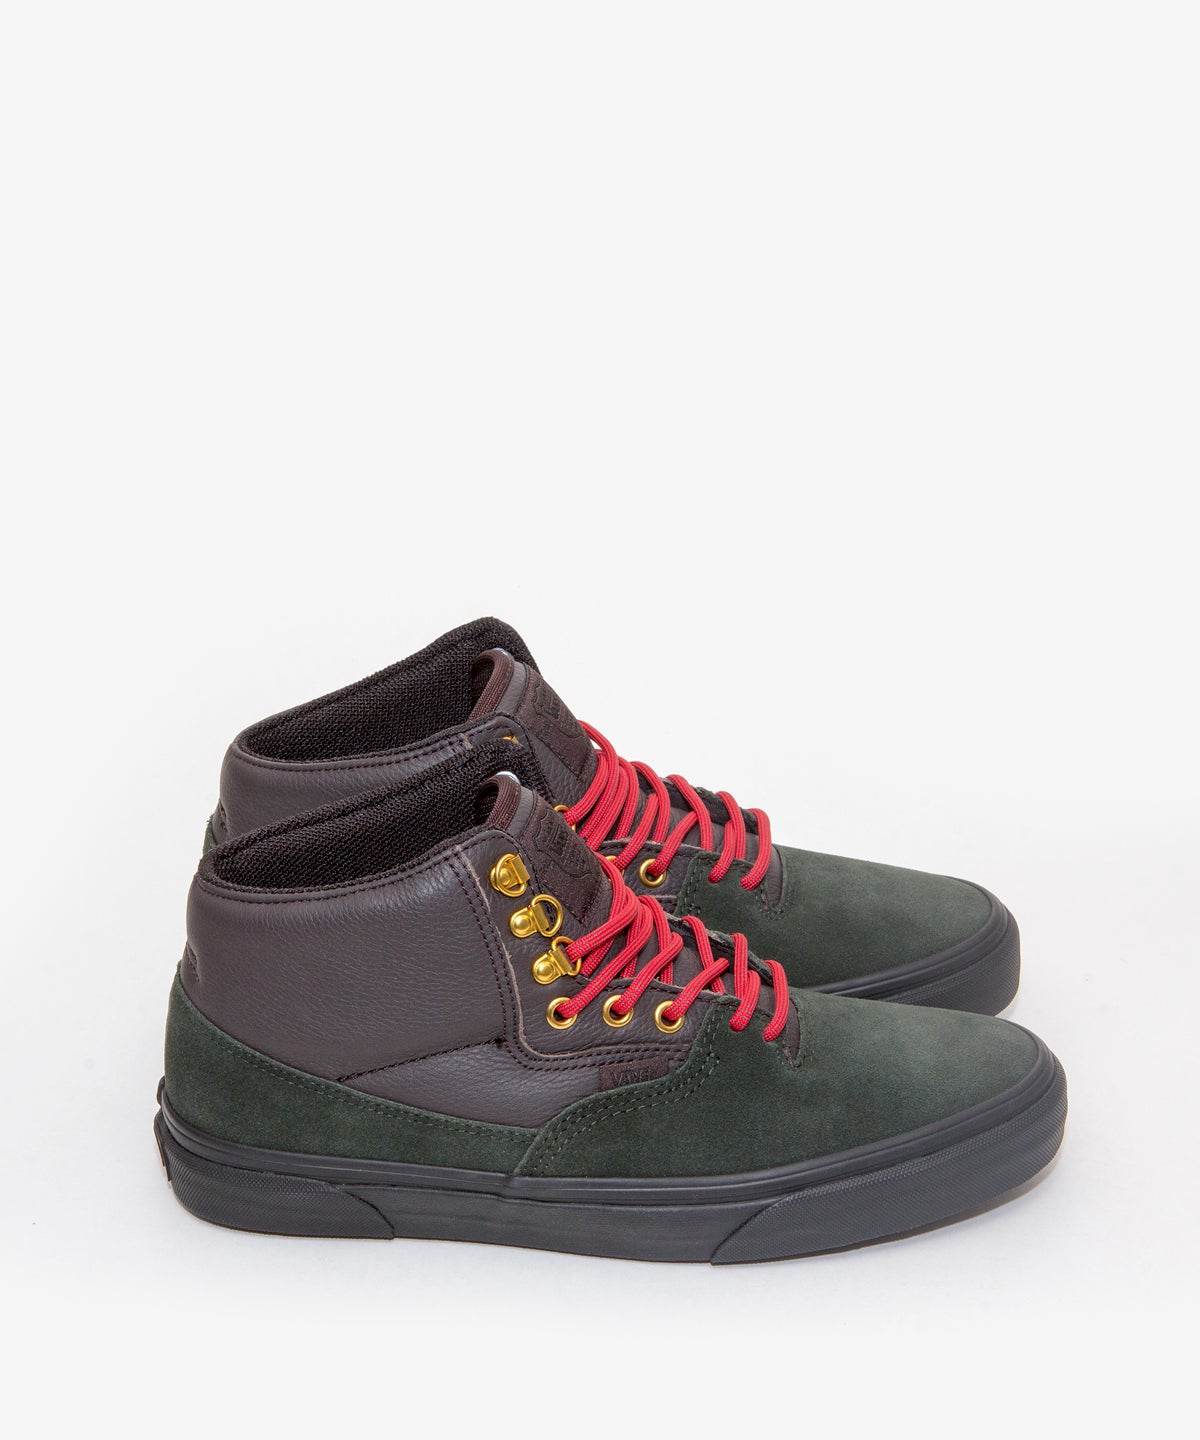 Vans x Civilware – Buffalo Trail Boot (Available @silostore) - Under The  Palms